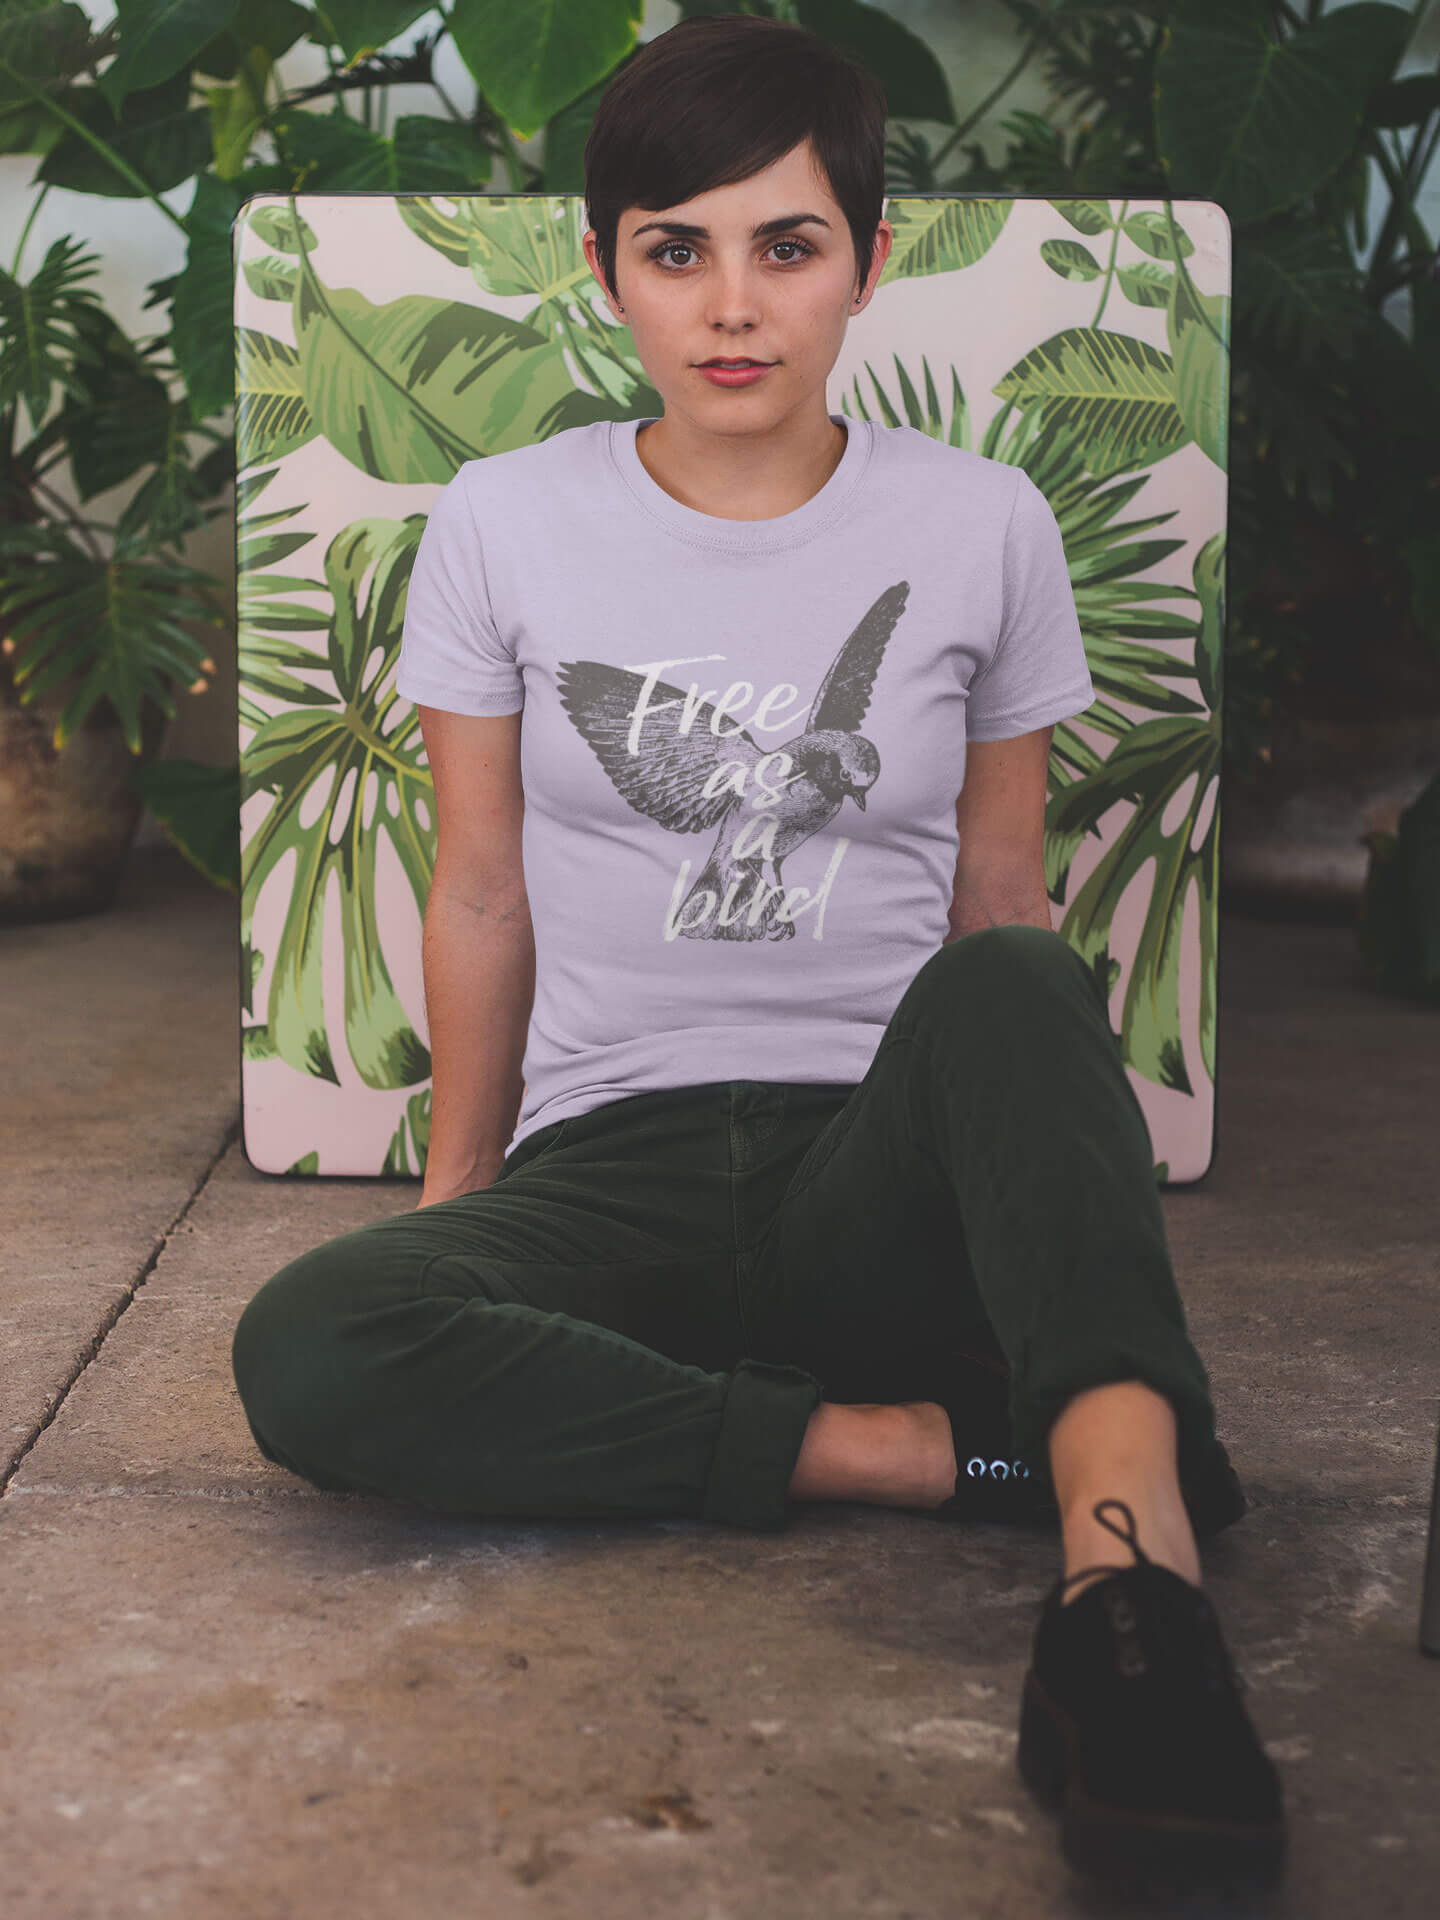 A short hair girl wearing a Tshirt-Mockup designed in Placeit